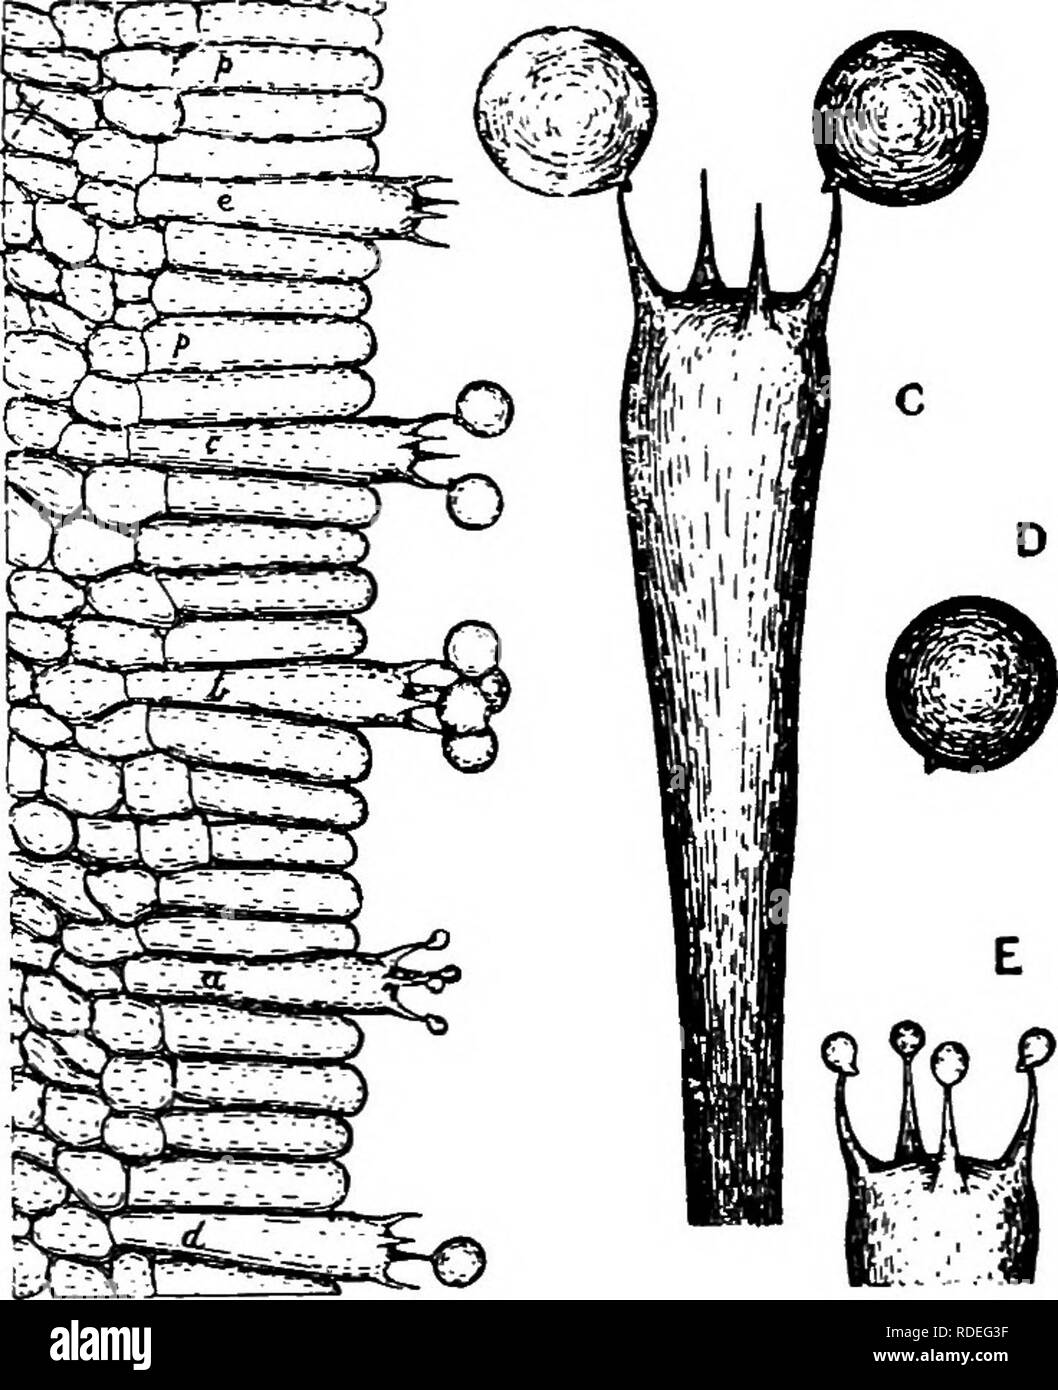 . A text-book of mycology and plant pathology . Plant diseases; Fungi in agriculture; Plant diseases; Fungi. Fig. 19.—Amanitopsis vagineta. Relations of spores to the fruit-body. A, Transverse section through two gills, h, basidia projecting, the arrows show spore parts (sporabola), Magn. 15; B, vertical section of hymenium and subhymenium, c paraphyses, a-c, basidia stages, Magn. 370; C, isolated basidium with two basidios- pores; D, discharged spore; E, basidium, Mayer, mo. (After Buller, 1909:165.)j sporabola (Fig. 19). There are two distinct types of fruit bodies as to spore production and Stock Photo